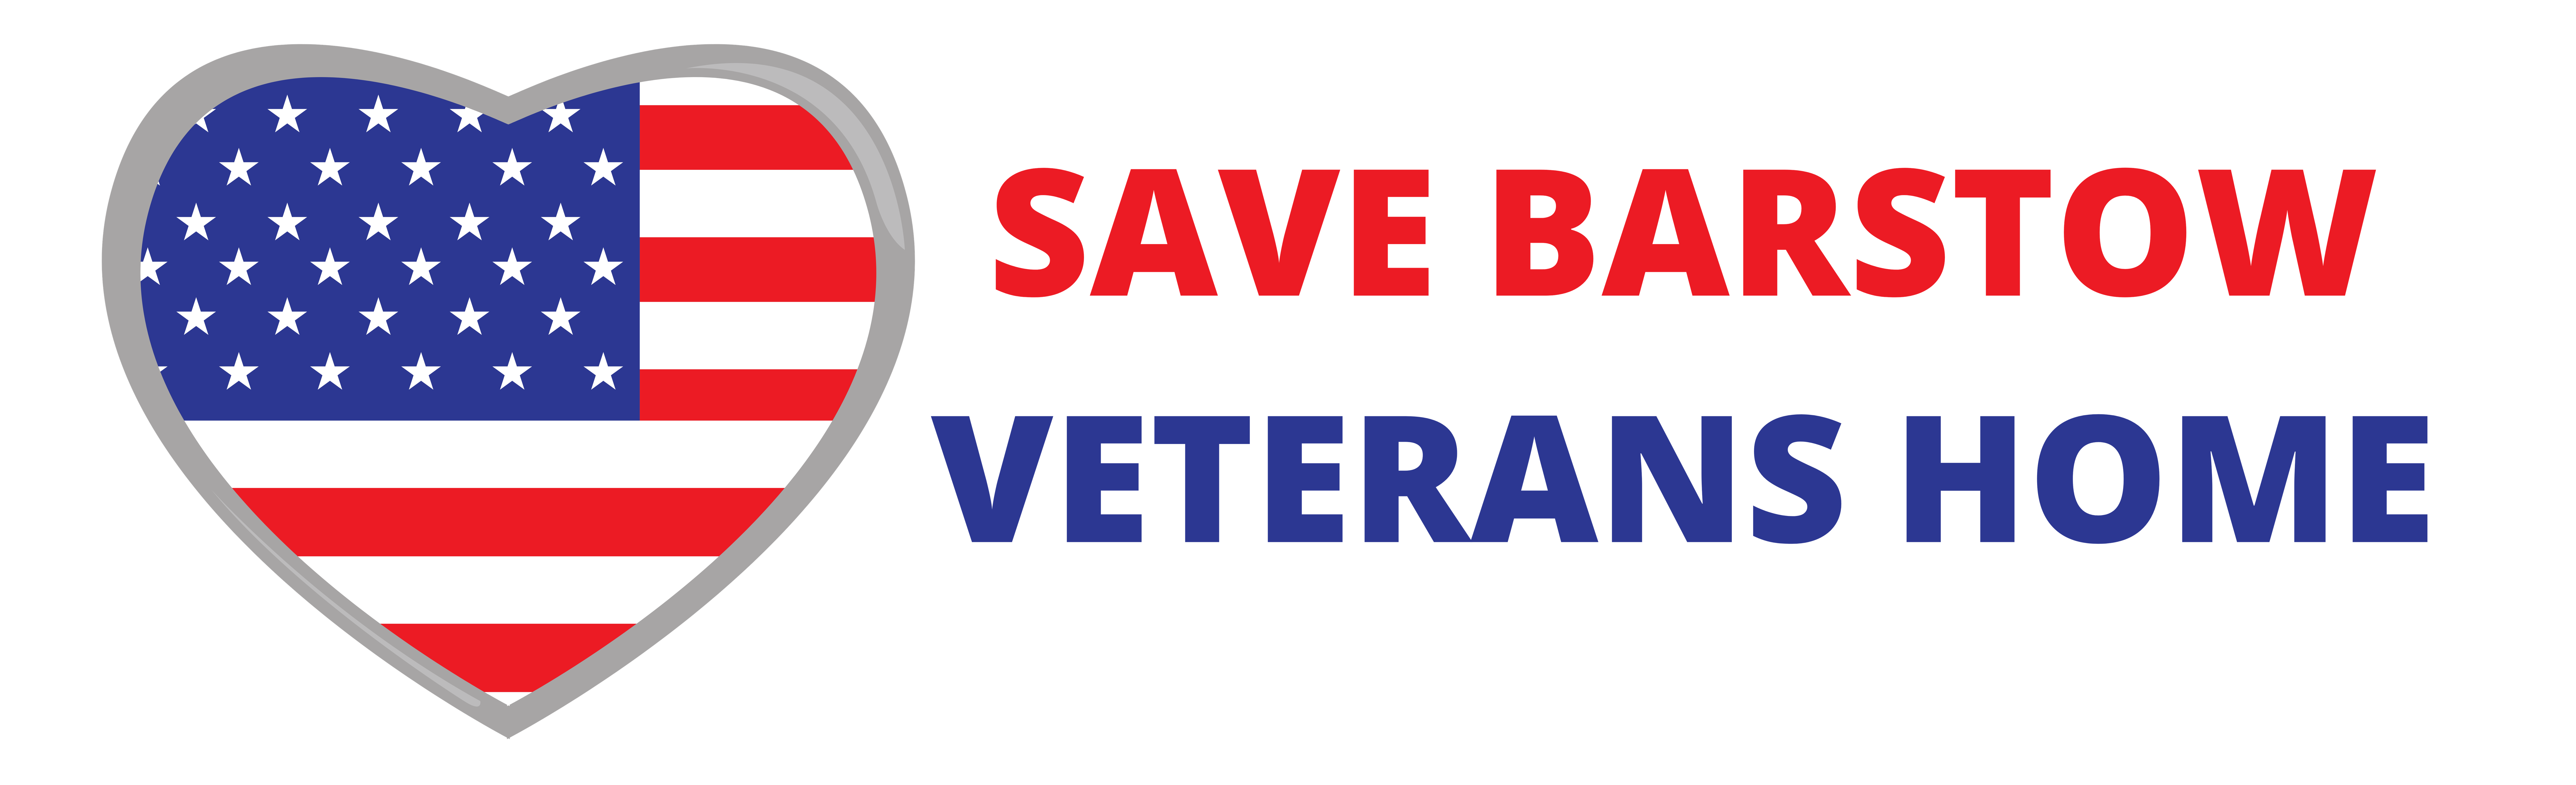 Save Barstow Vets